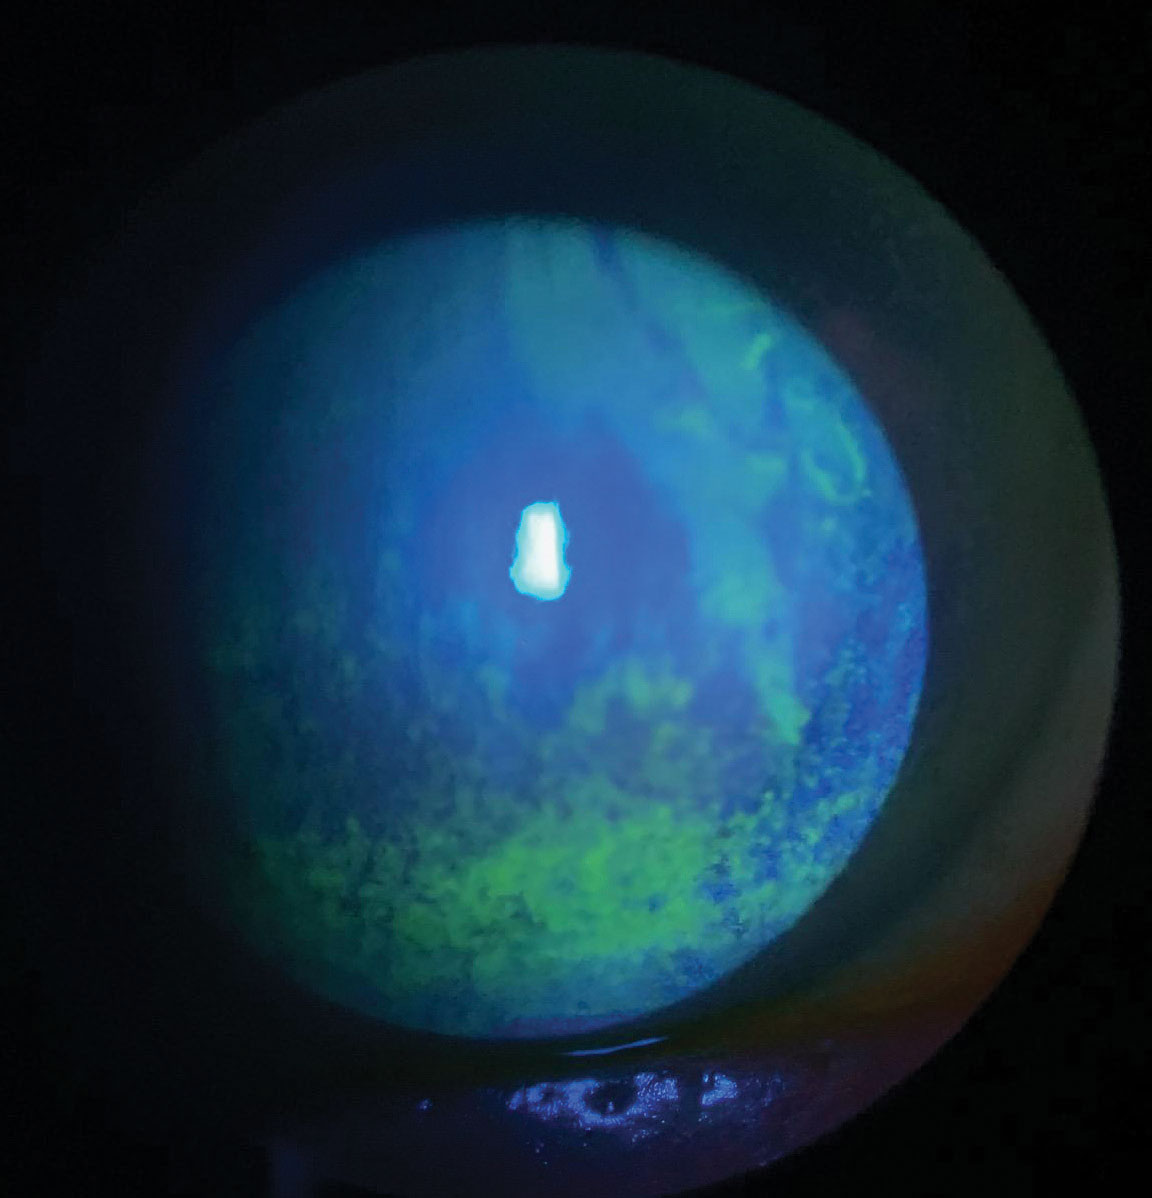 Maximum Blink Interval Helps Detect Dry Eye Cases with Mismatch of Signs vs. Symptoms The findings were diagnostic in patients when TBUT and Schirmer’s scores weren’t. reviewofoptometry.com/article/maximu… #dryeye #cornea #ded #eyecare #optometry